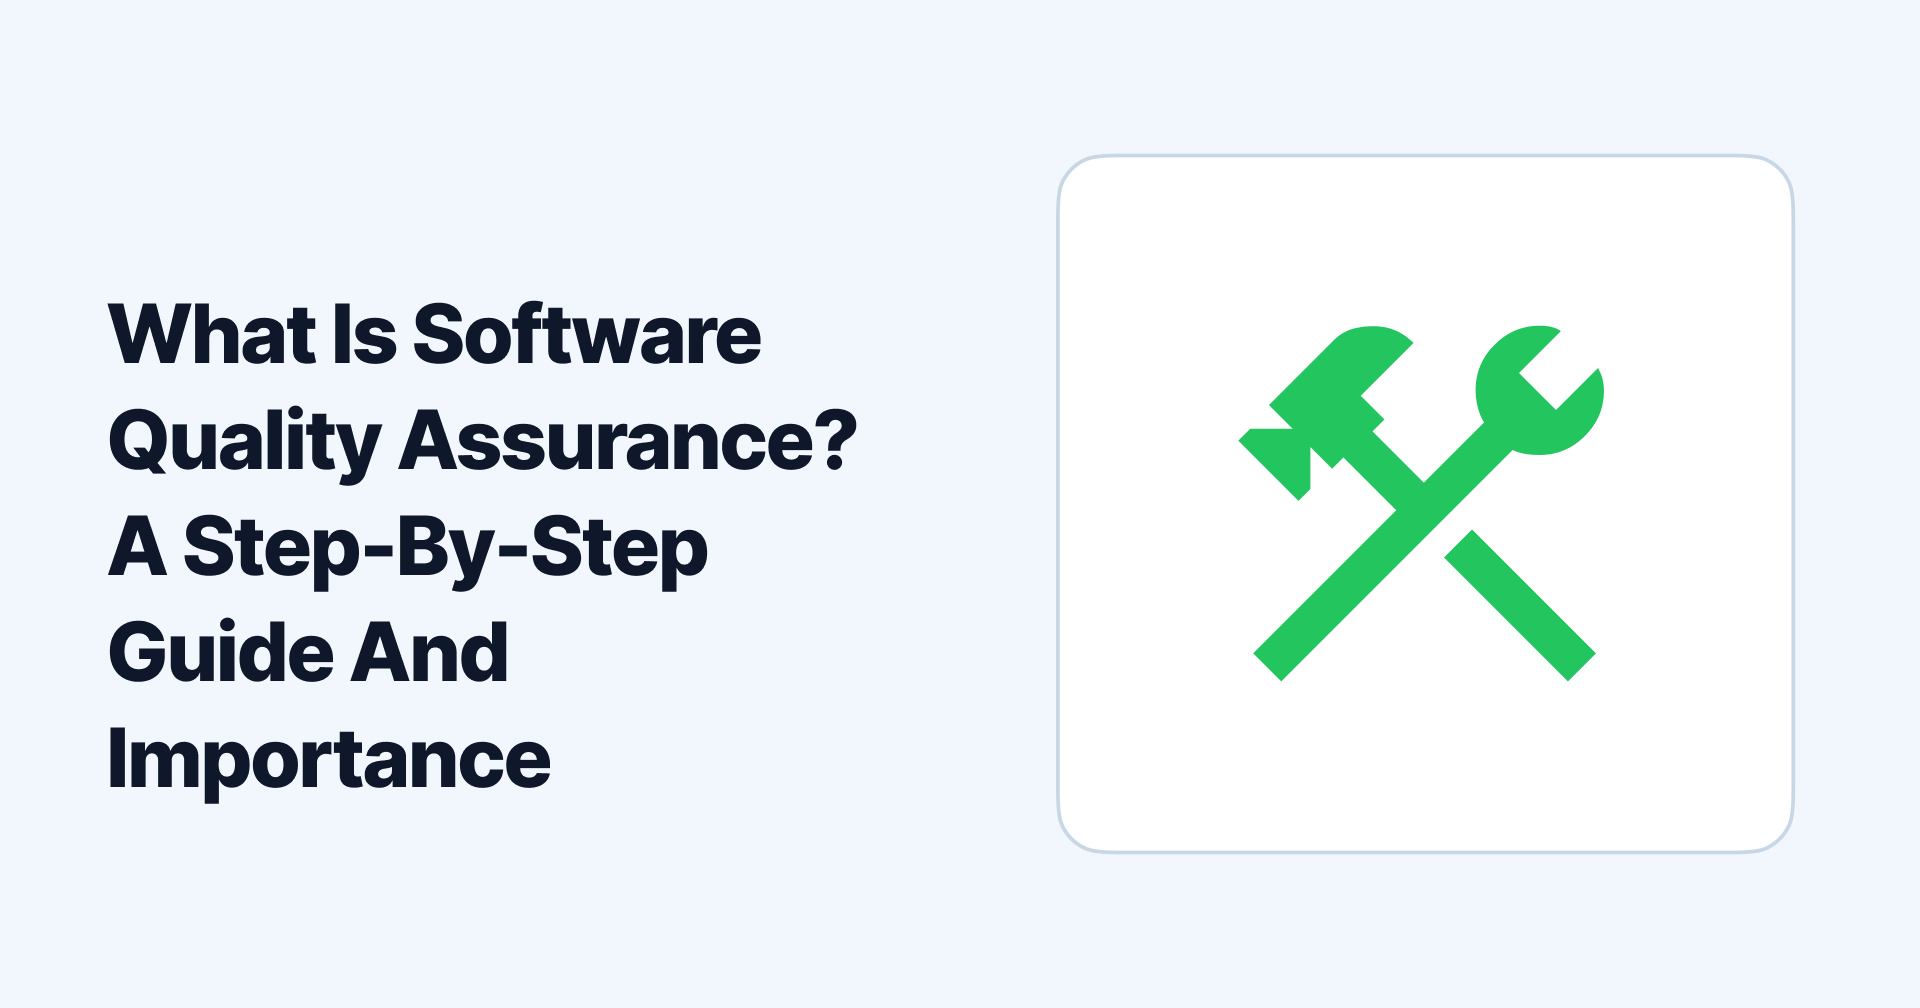 What Is Software Quality Assurance? A Step-By-Step Guide And Importance